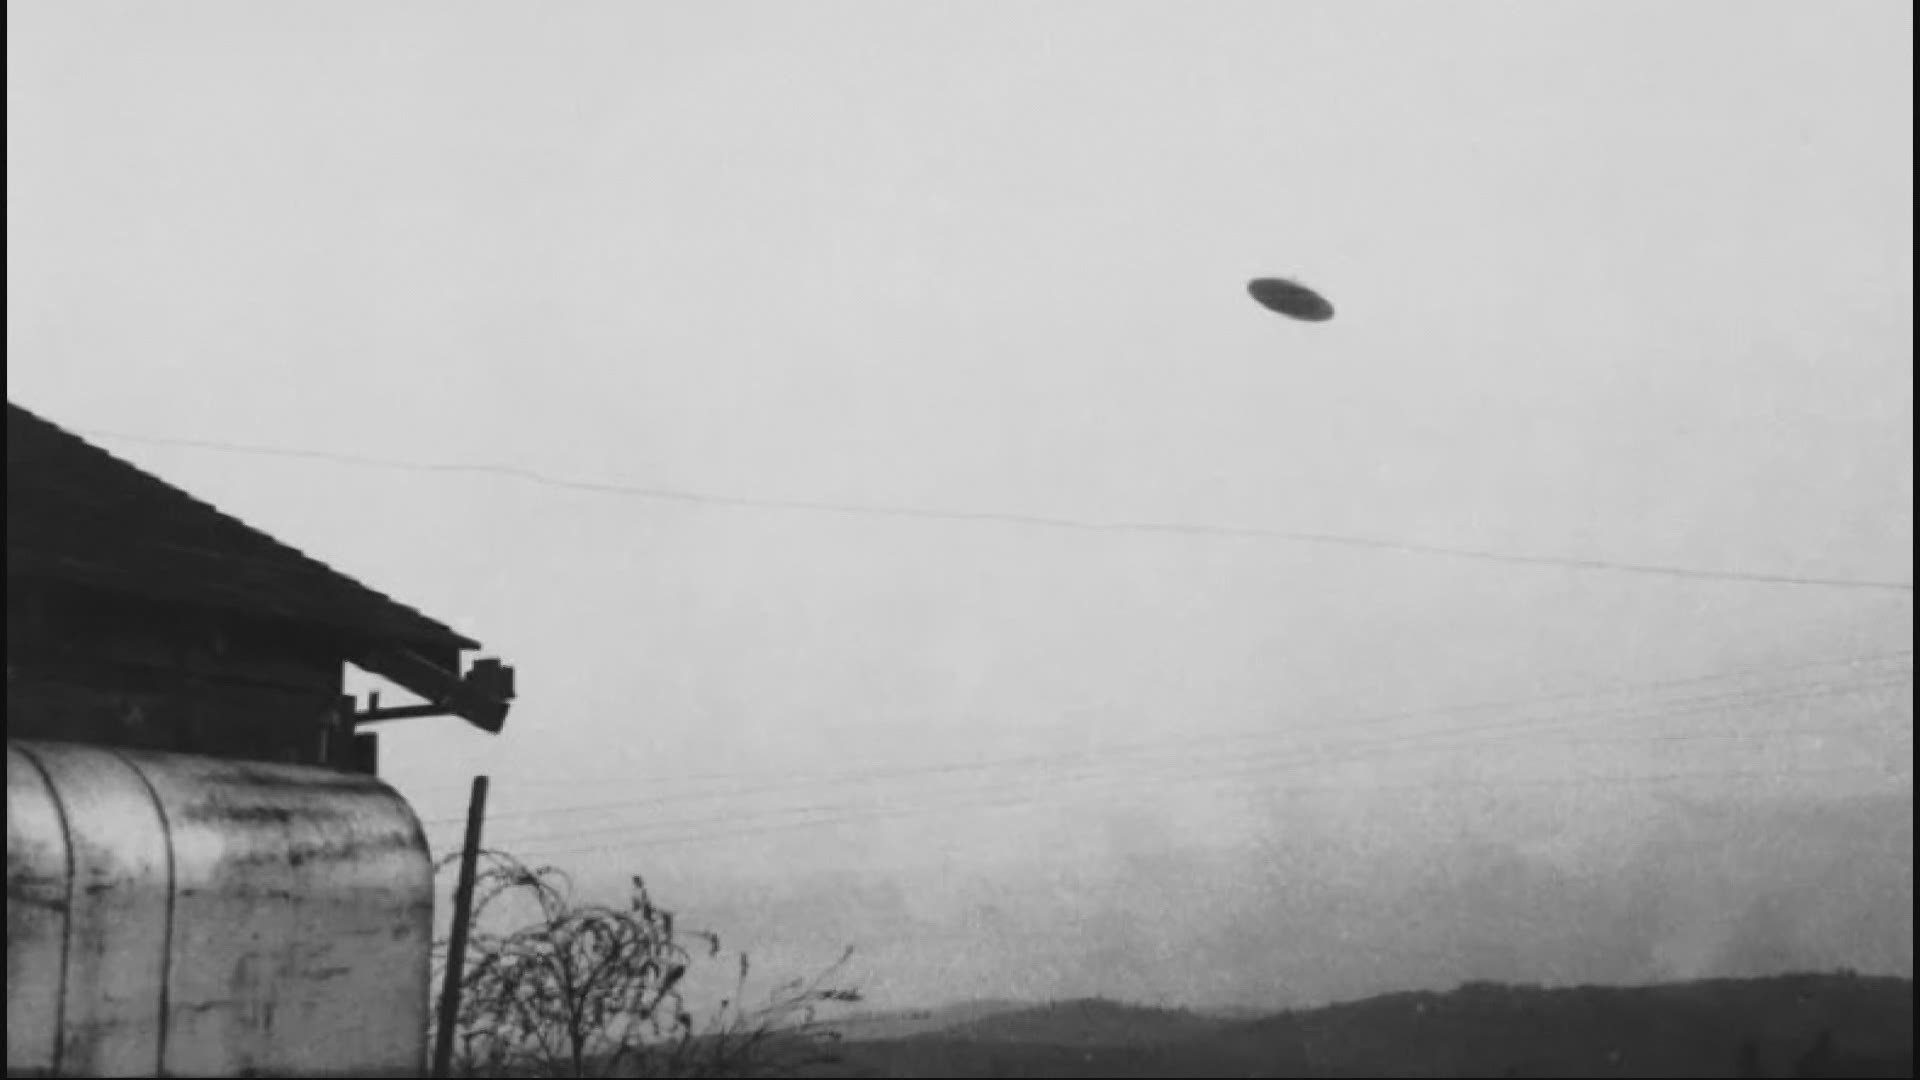 Oregon has a very interesting history with UFOs. Head into the Vault to check it out